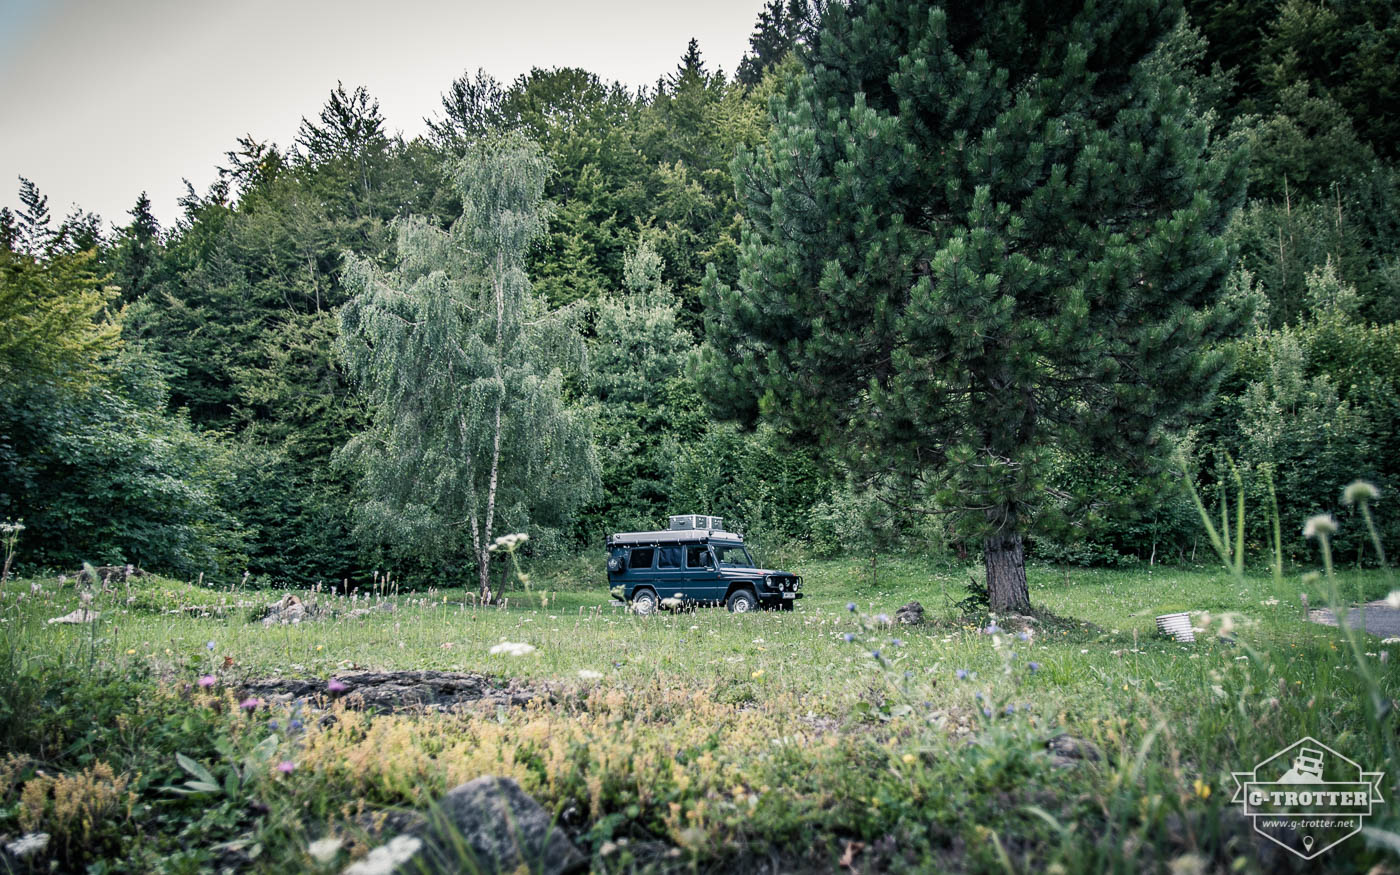 The first campsite in Slovakia was a lucky find.